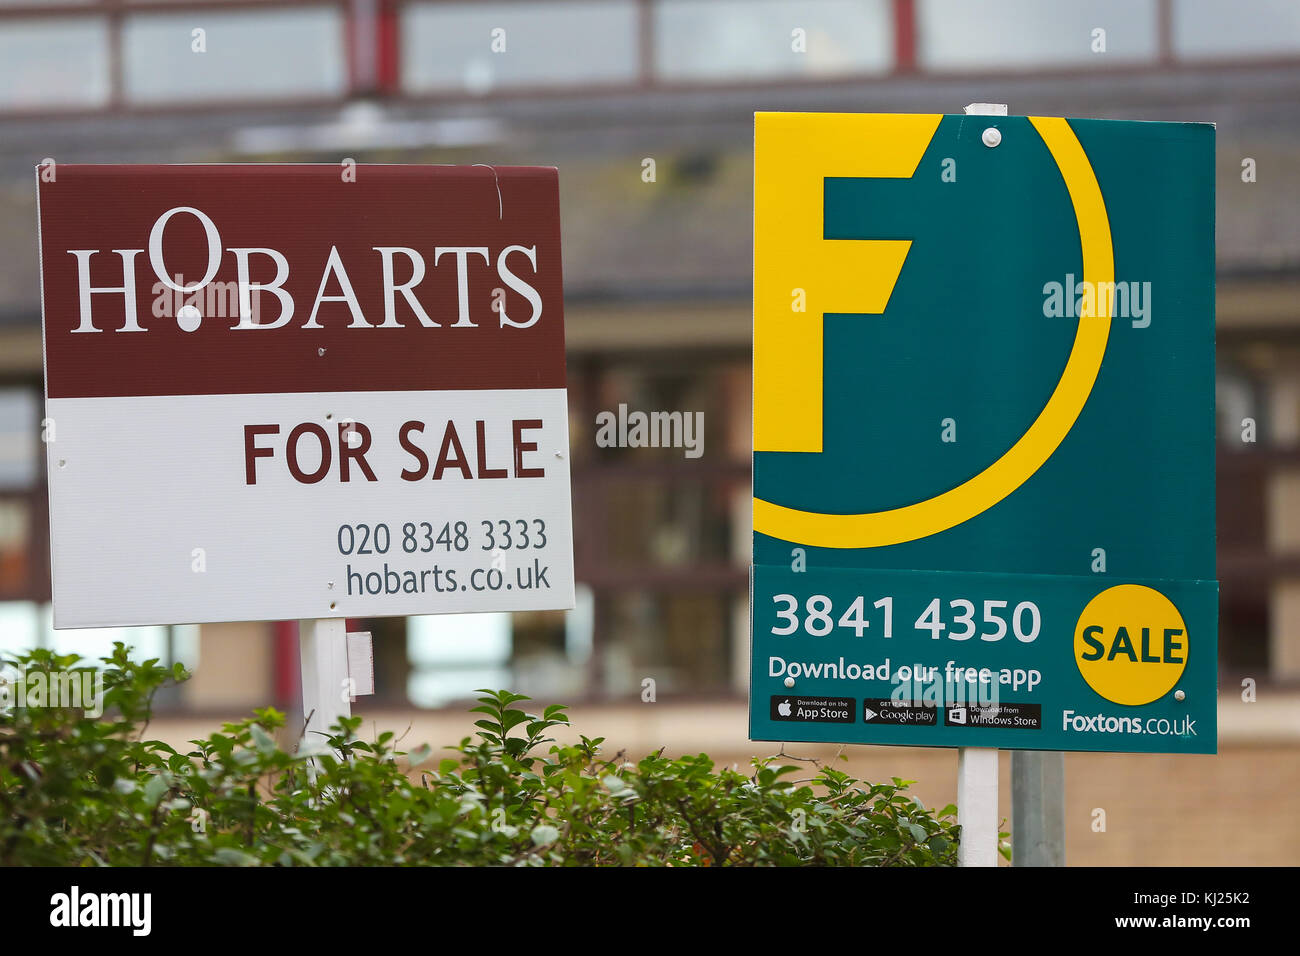 North London. UK 21 Nov 2017 - An estate agents' 'For Sale' marketing boards outside a North London property as Britain's Chancellor of the Exchequer Philip Hammond is expected to announce plans to build 300,000 homes every year, in his autumn budget on Wednesday, 22 November 2017. It has been reported in the Sunday Times newspaper that Philip Hammond will do 'whatever it takes' to meet this target. Stock Photo